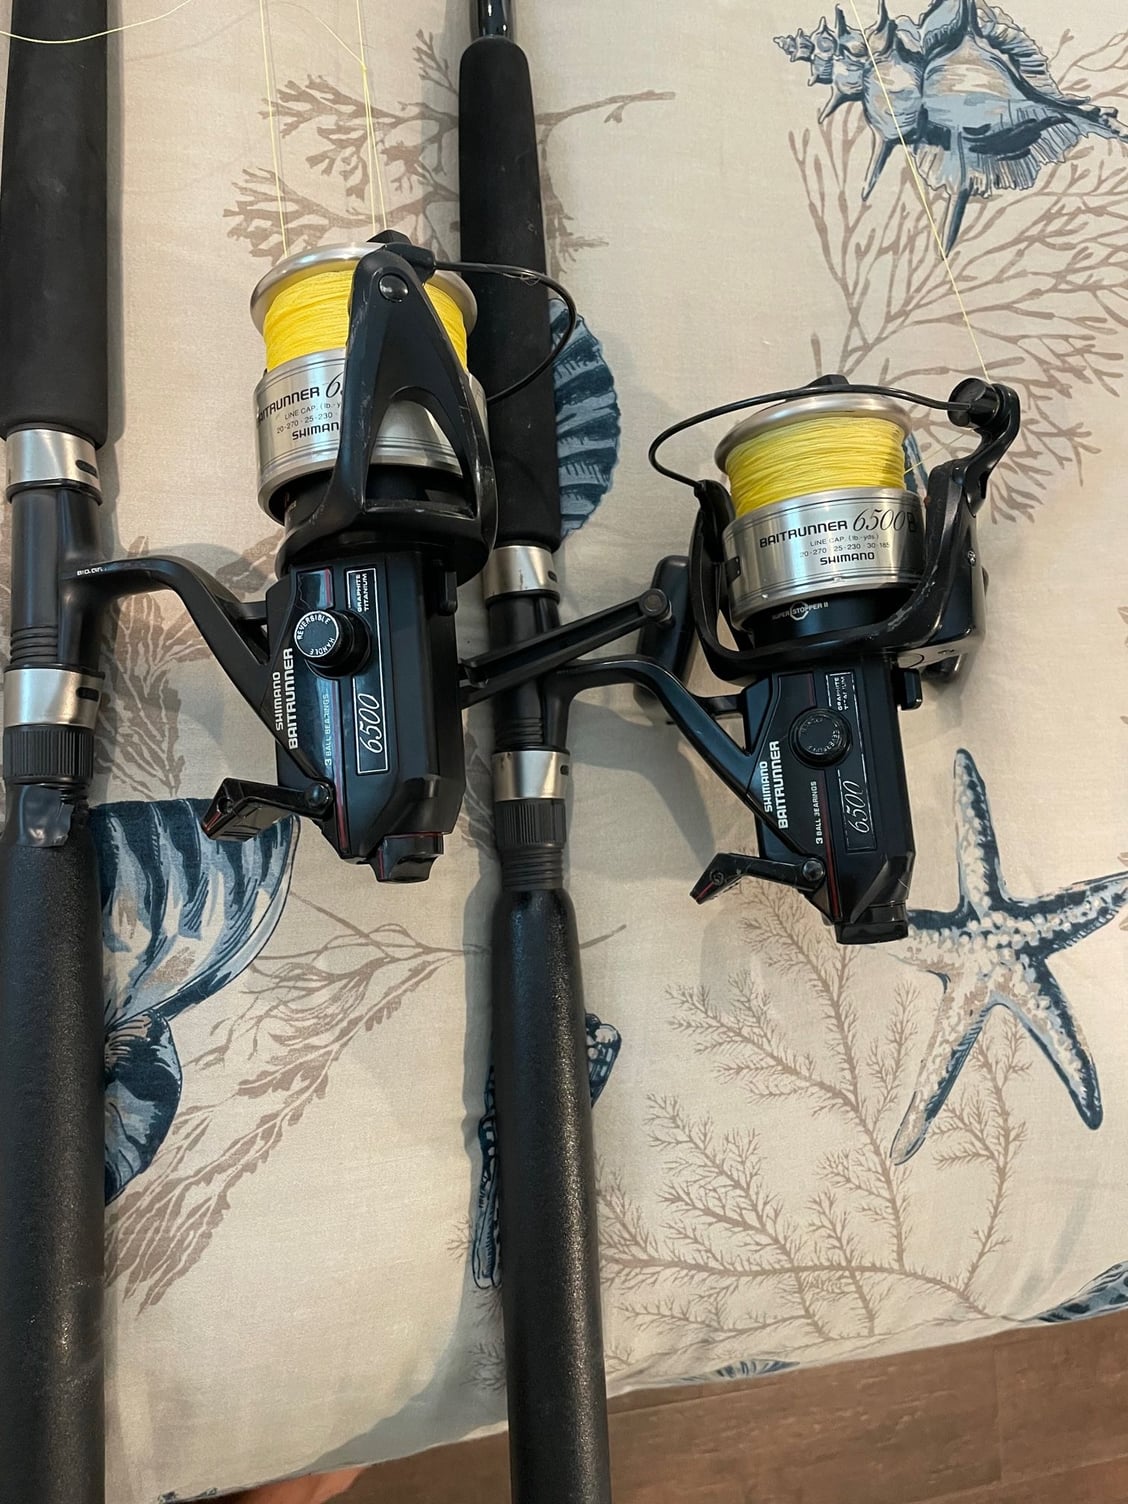 2 Shimano Baitrunner 6500B Combos For Sale - The Hull Truth